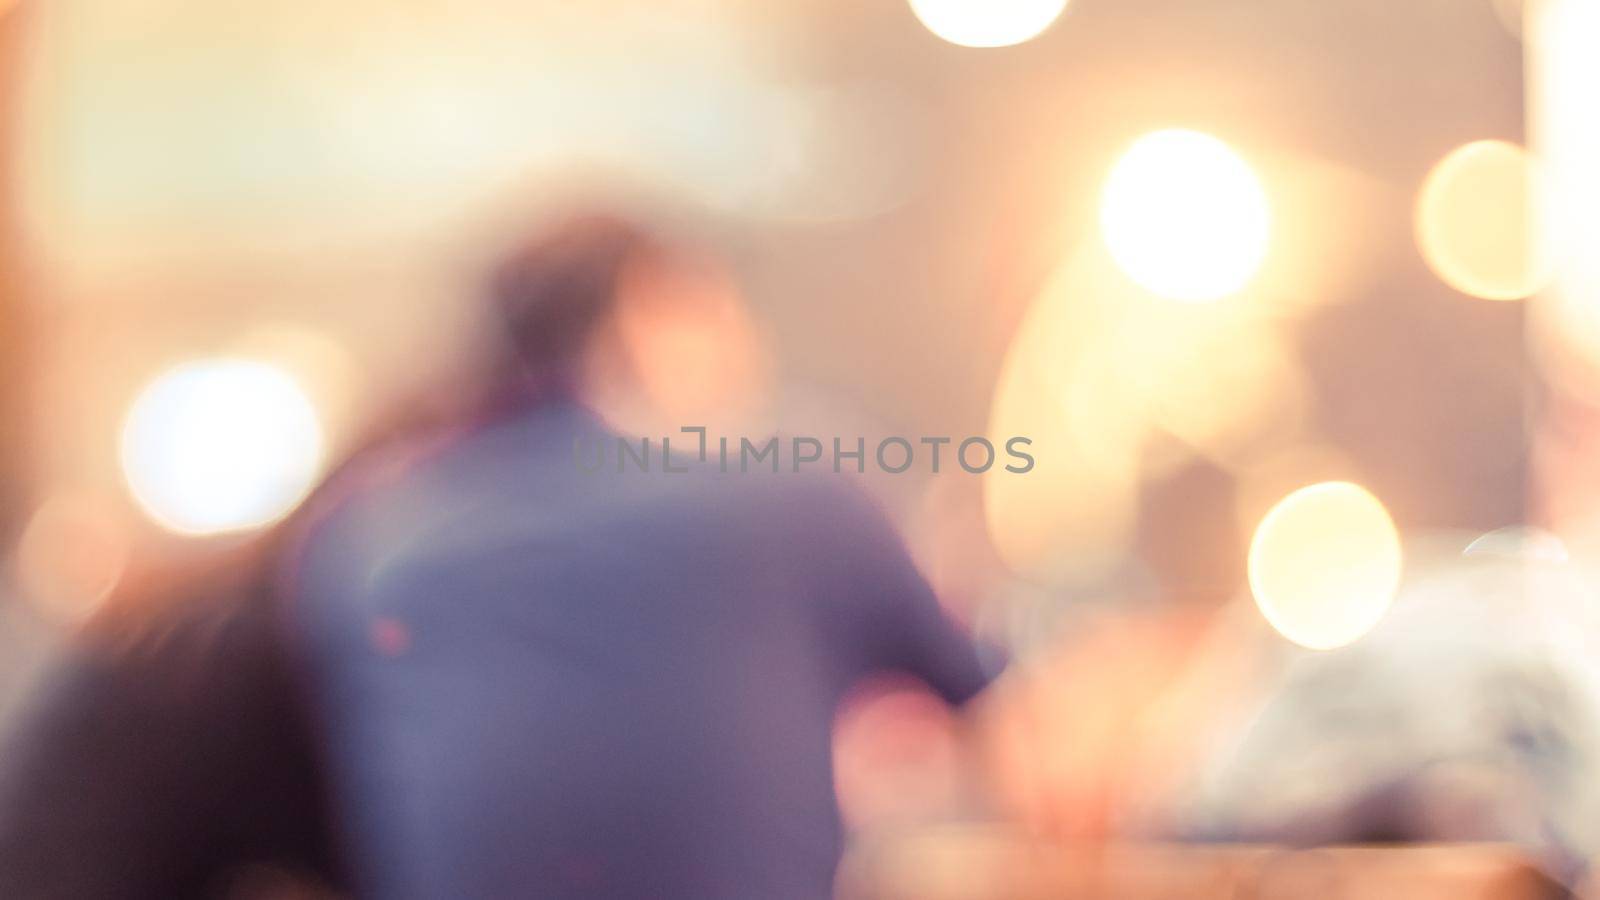 Blur photography for background in restaurant on the background of the couple